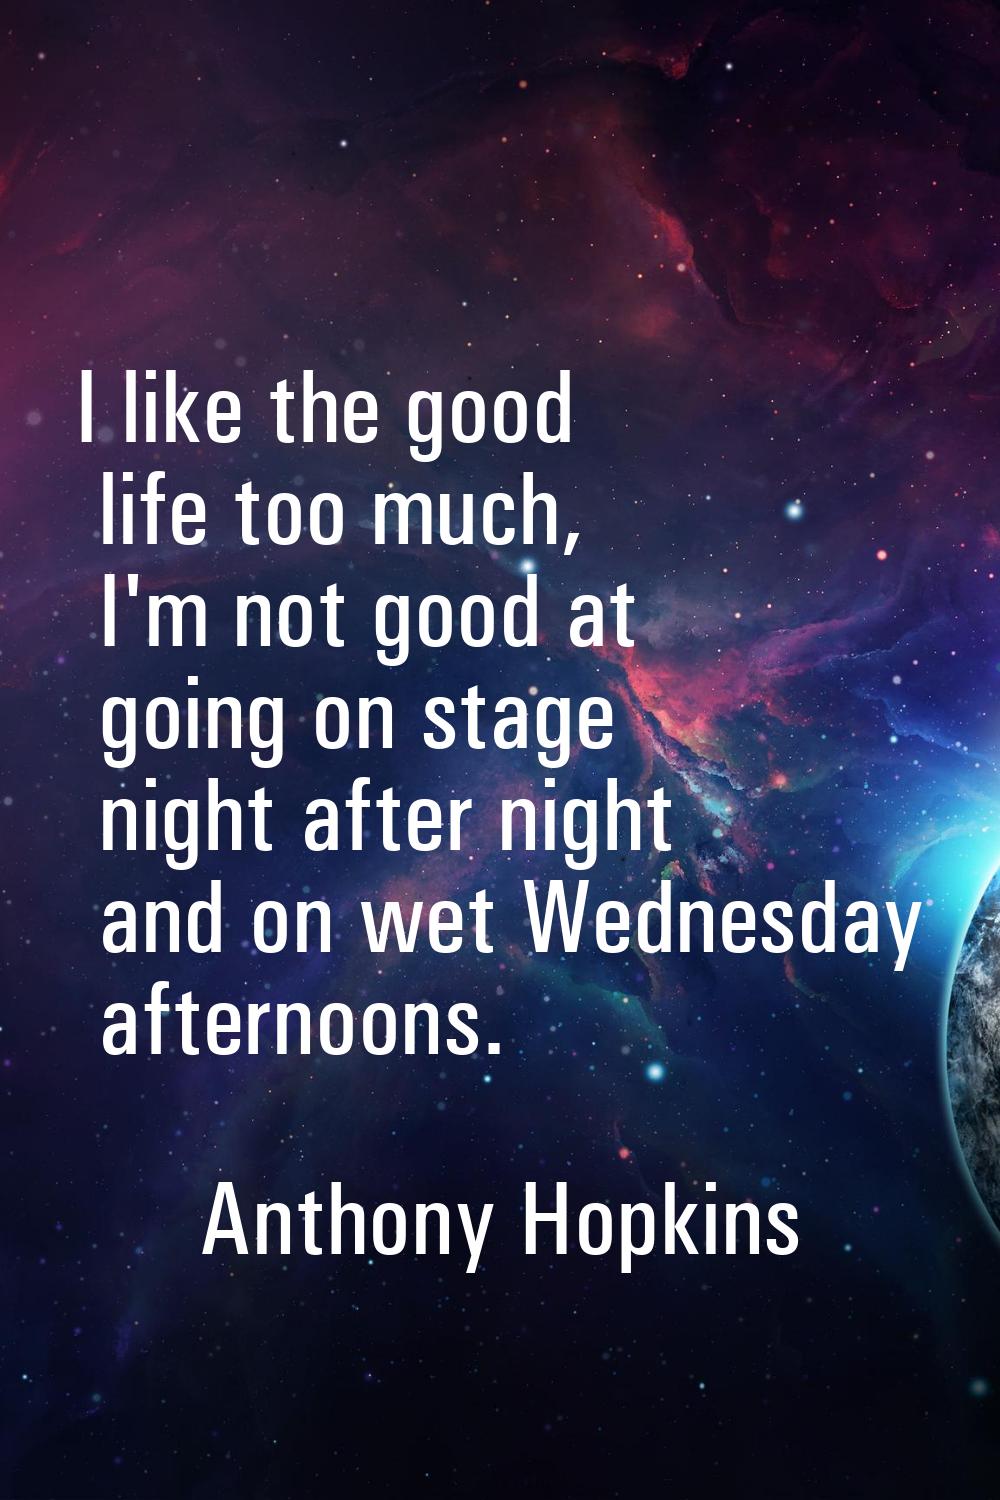 I like the good life too much, I'm not good at going on stage night after night and on wet Wednesda